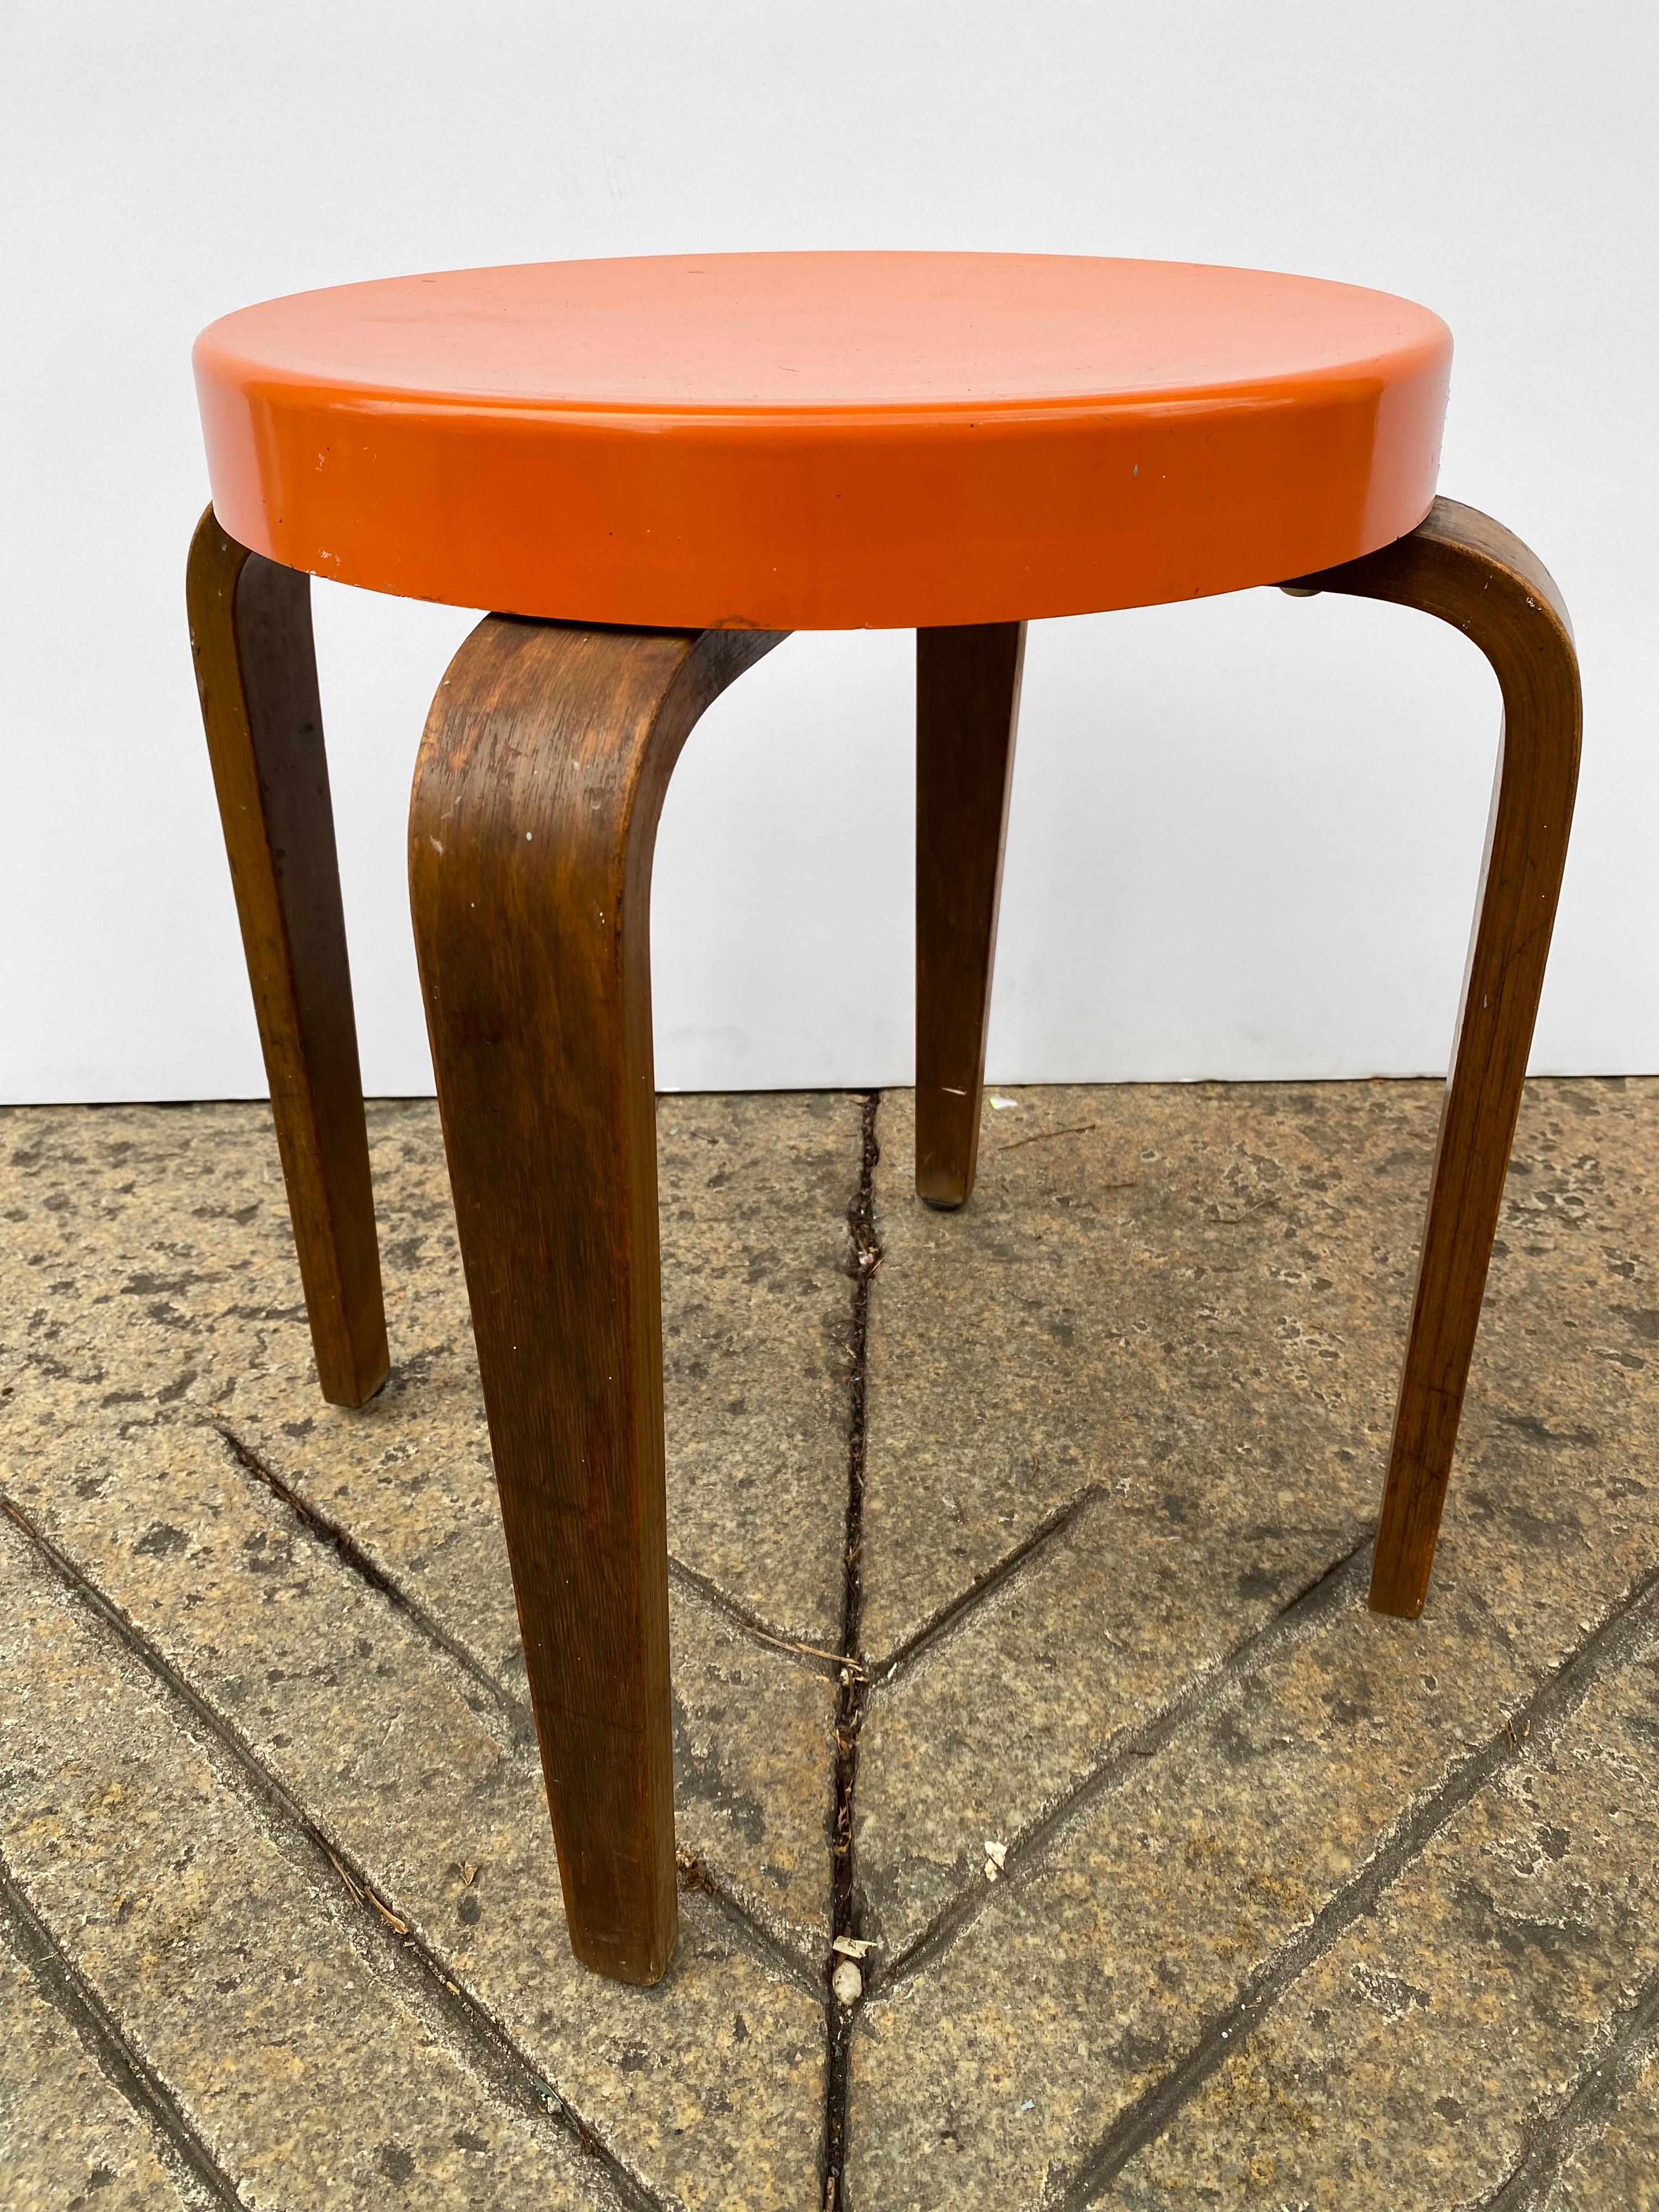 Functional and very useful Thonet stool! Plastic Cast top with molded curved legs. Perfect to sit on or use as a small side table. Legs show wear, but top polished up very nice!